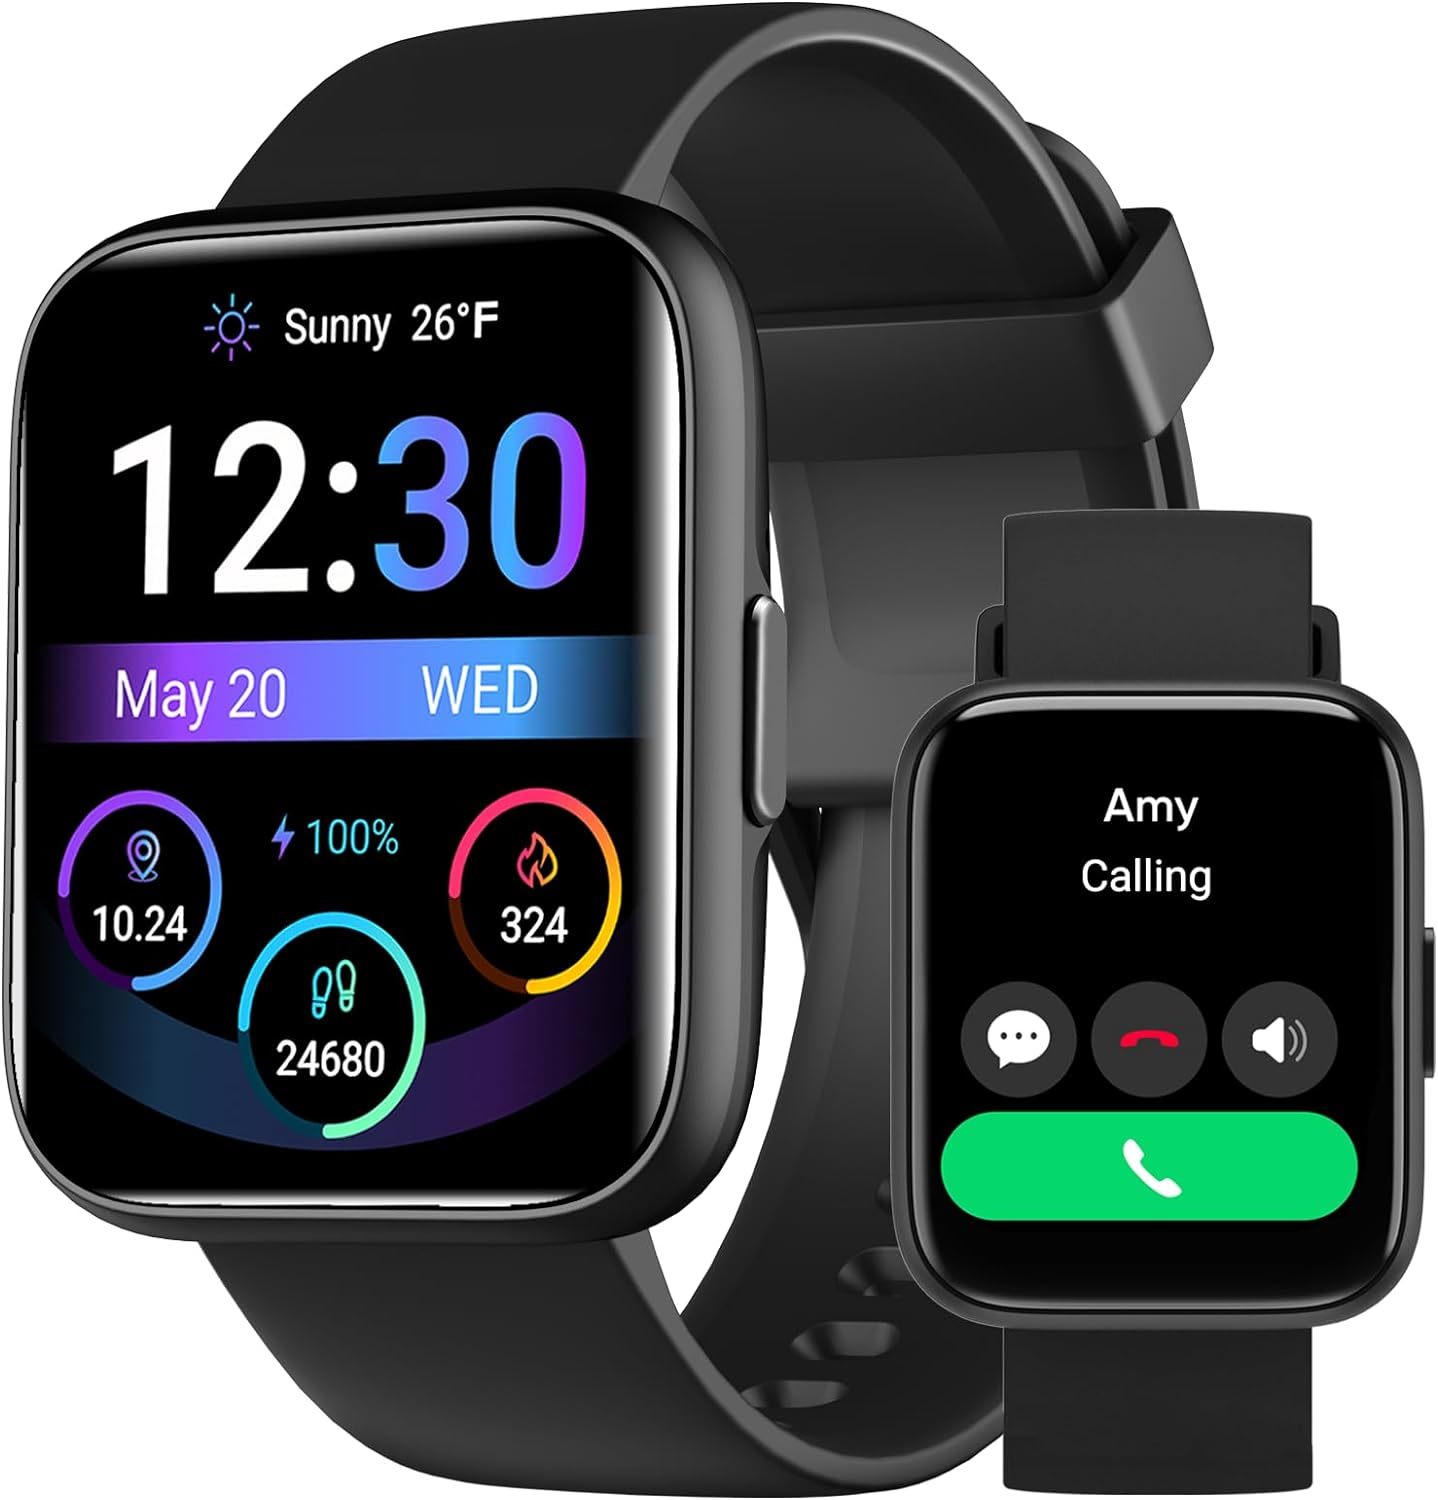 Smart Watch for Men Women Compatible with iPhone Samsung Android Phone 1.83" sq - $59.99